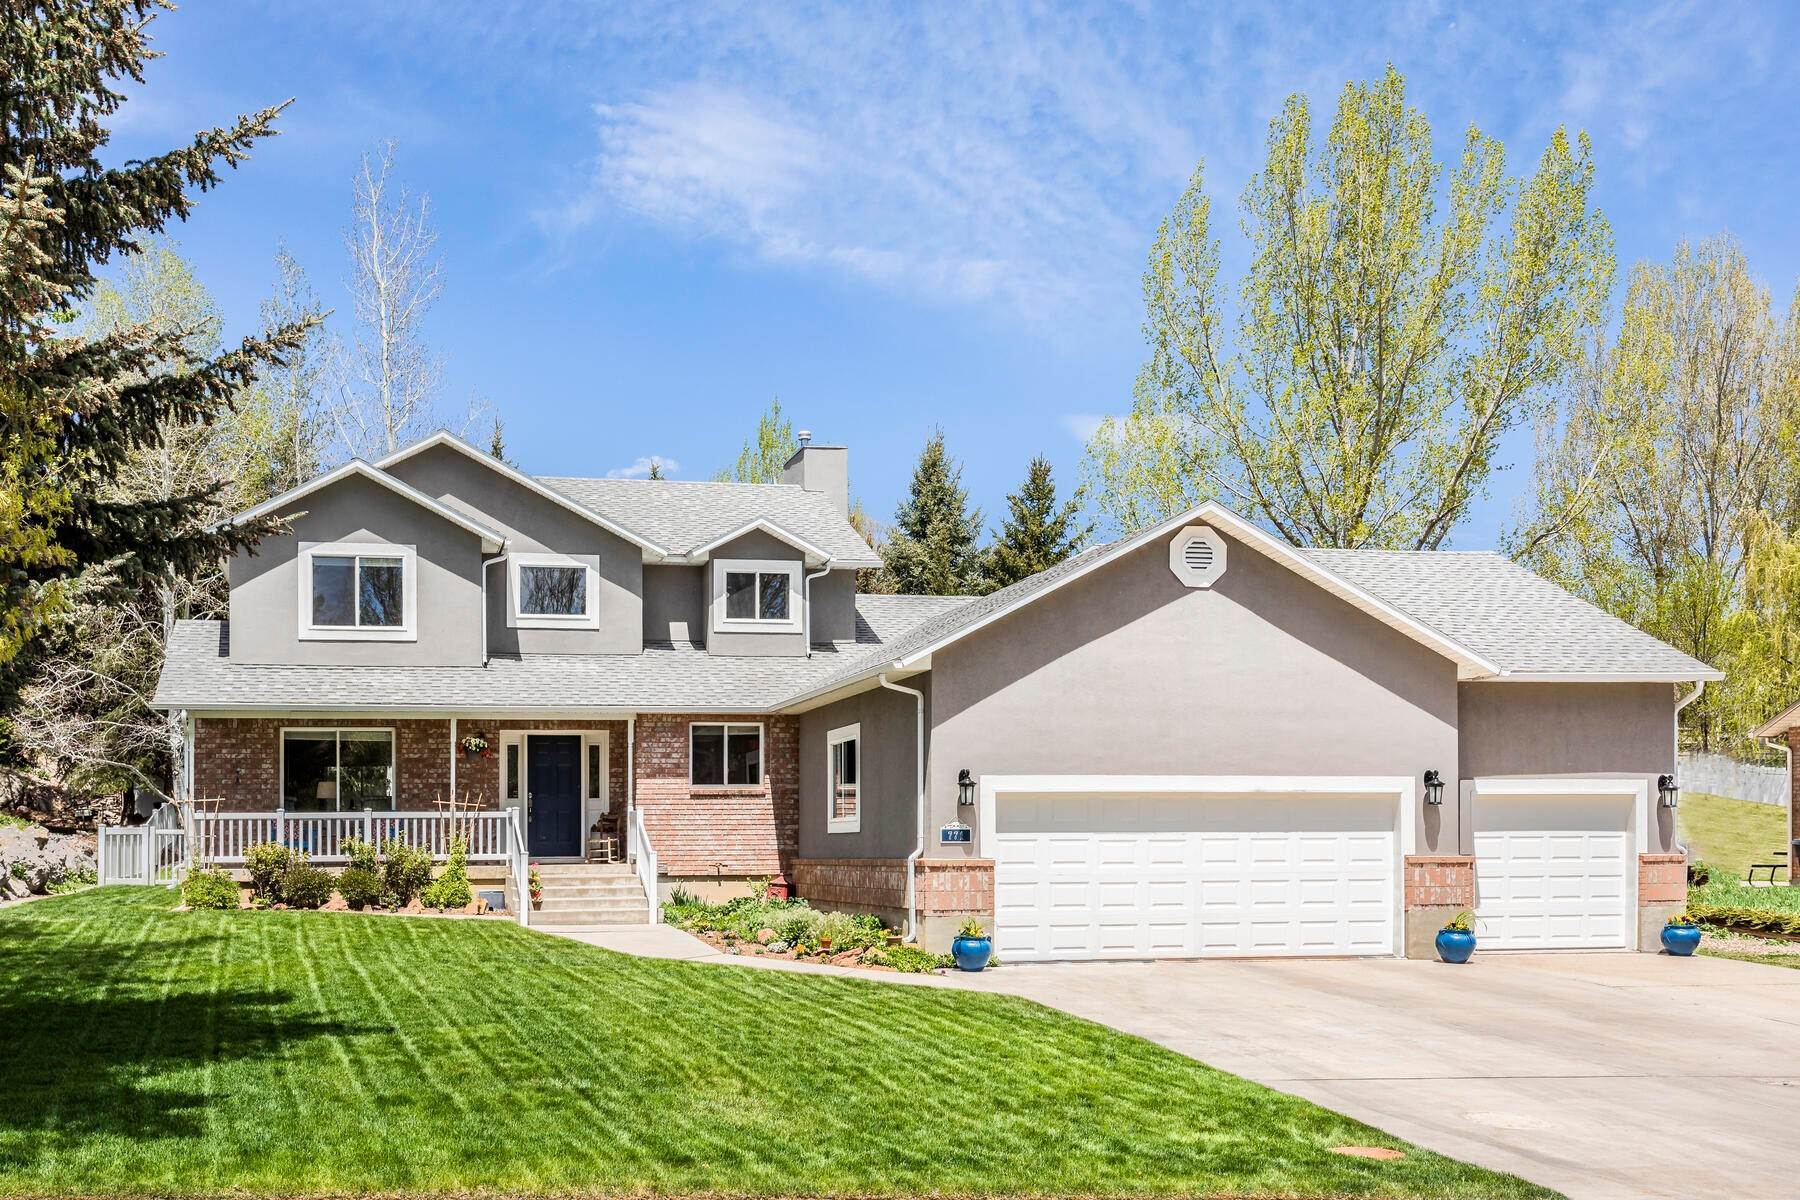 Single Family Homes for Sale at Heber Valley Haven Lined with Evergreens and Aspens! 771 E Ridge Dr Heber, Utah 84032 United States